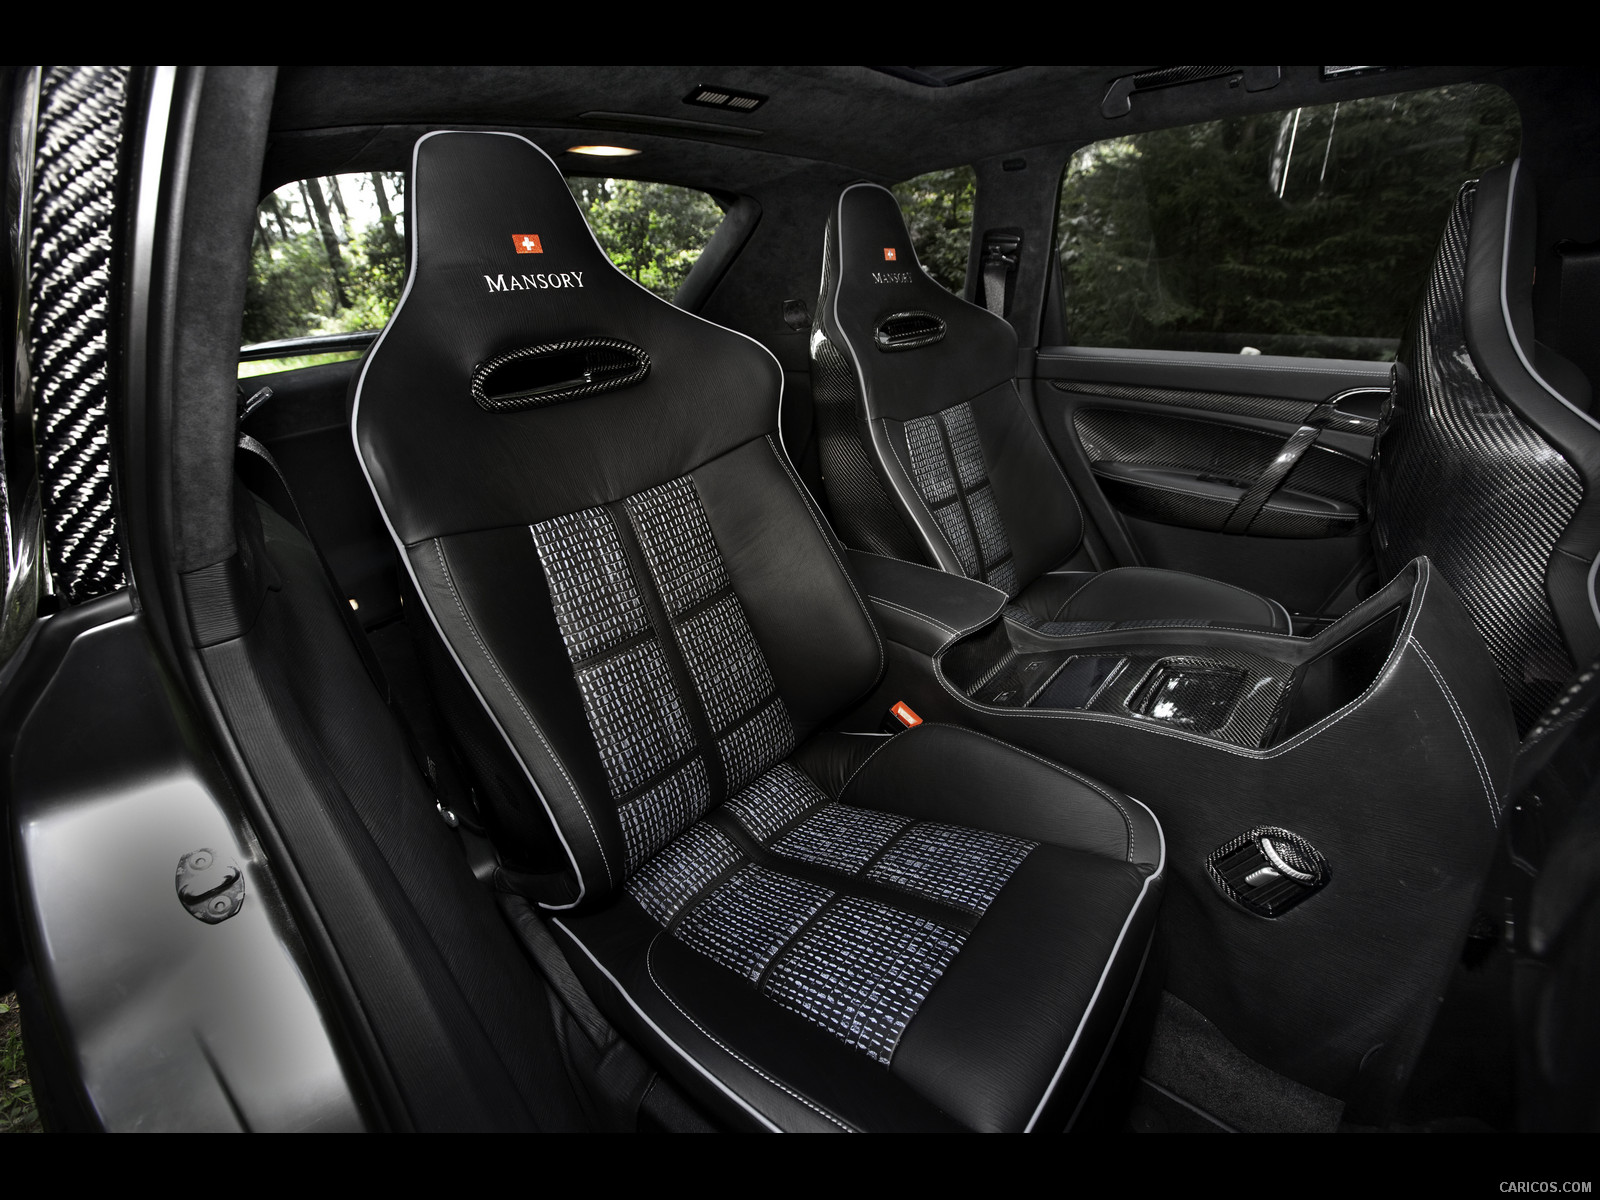 2009 Mansory Chopster based on Porsche Cayenne Turbo S  - Interior, #31 of 38